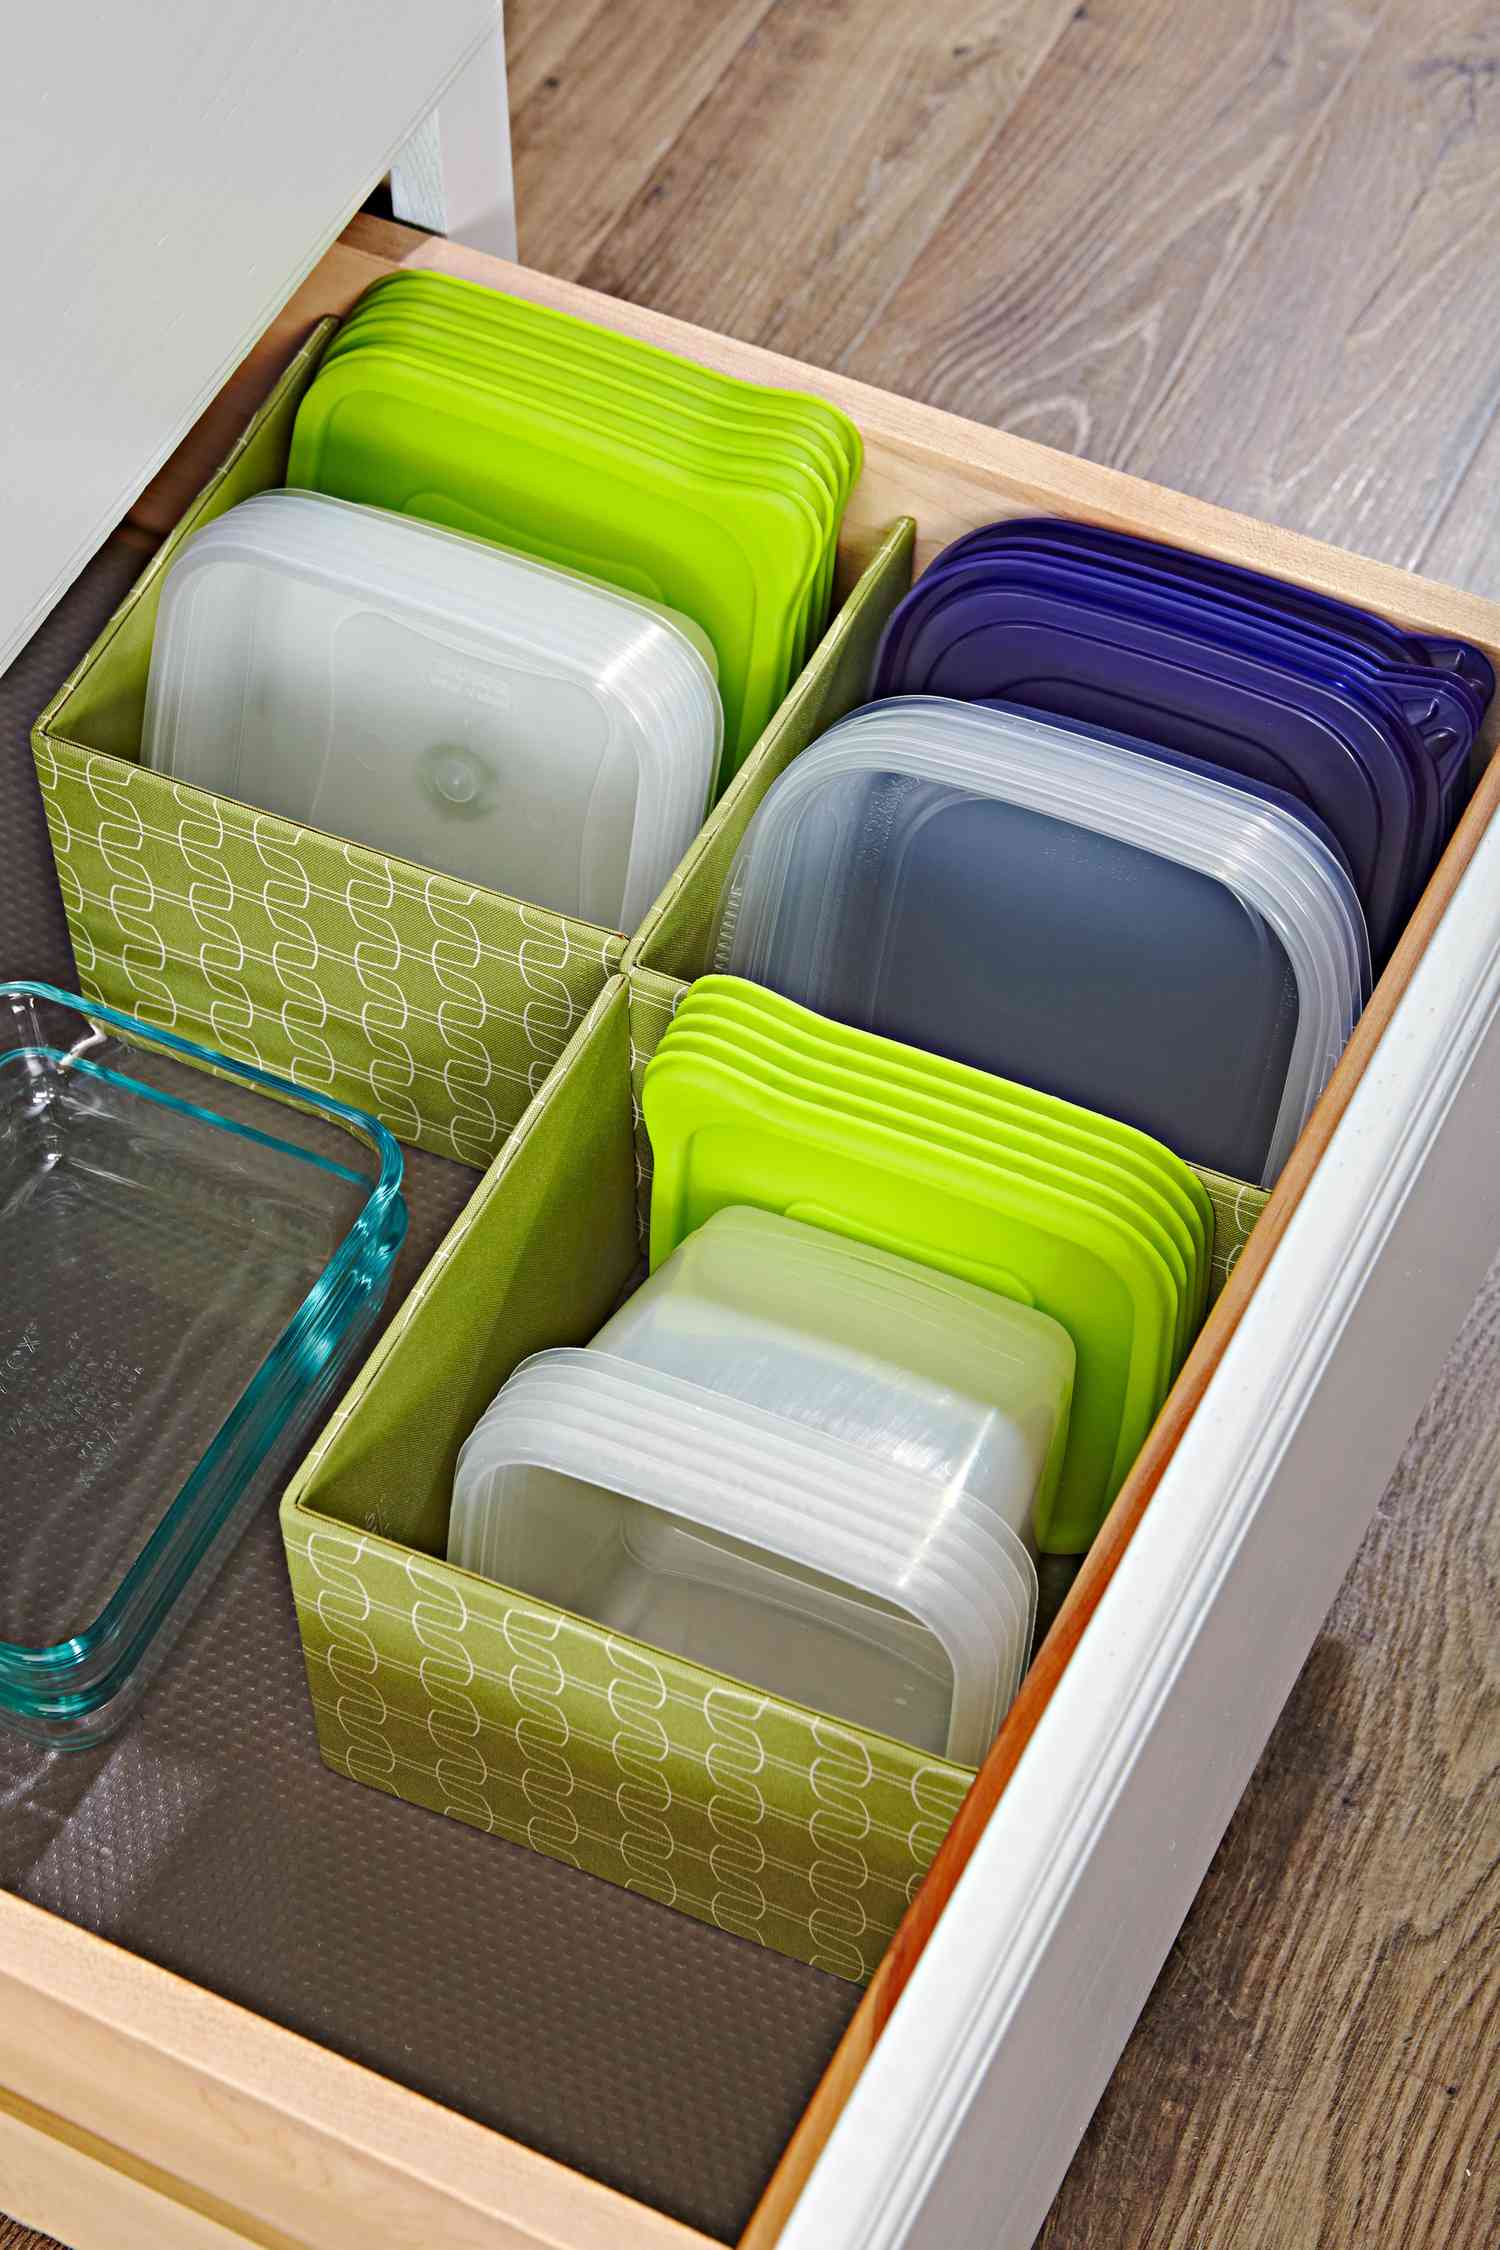 organized plastic food storage containers with green and blue lids